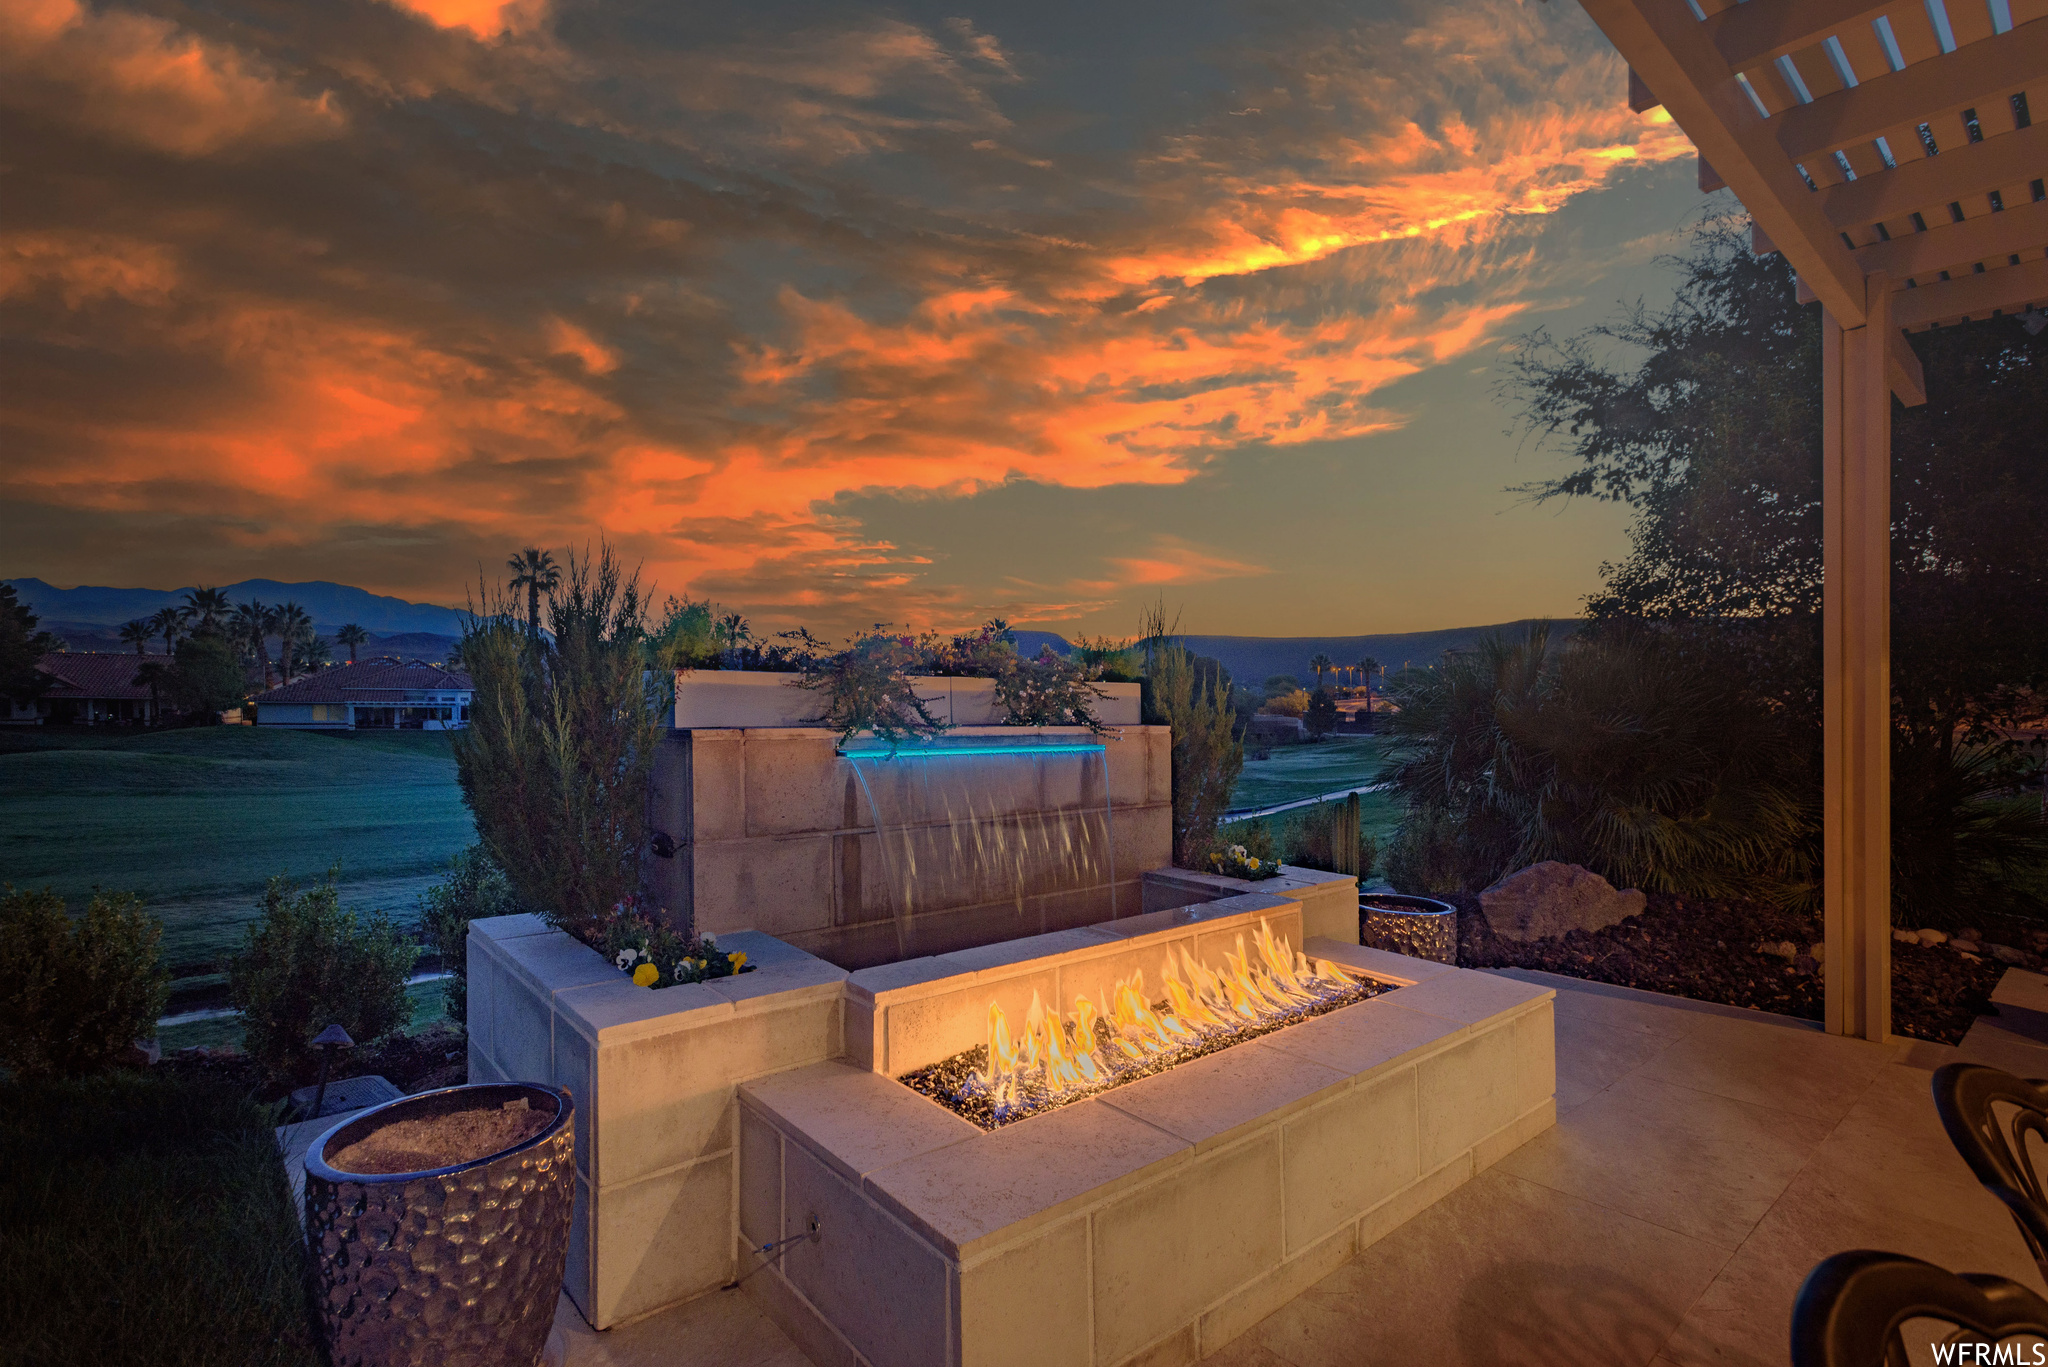 Water Feature/Fire Pit